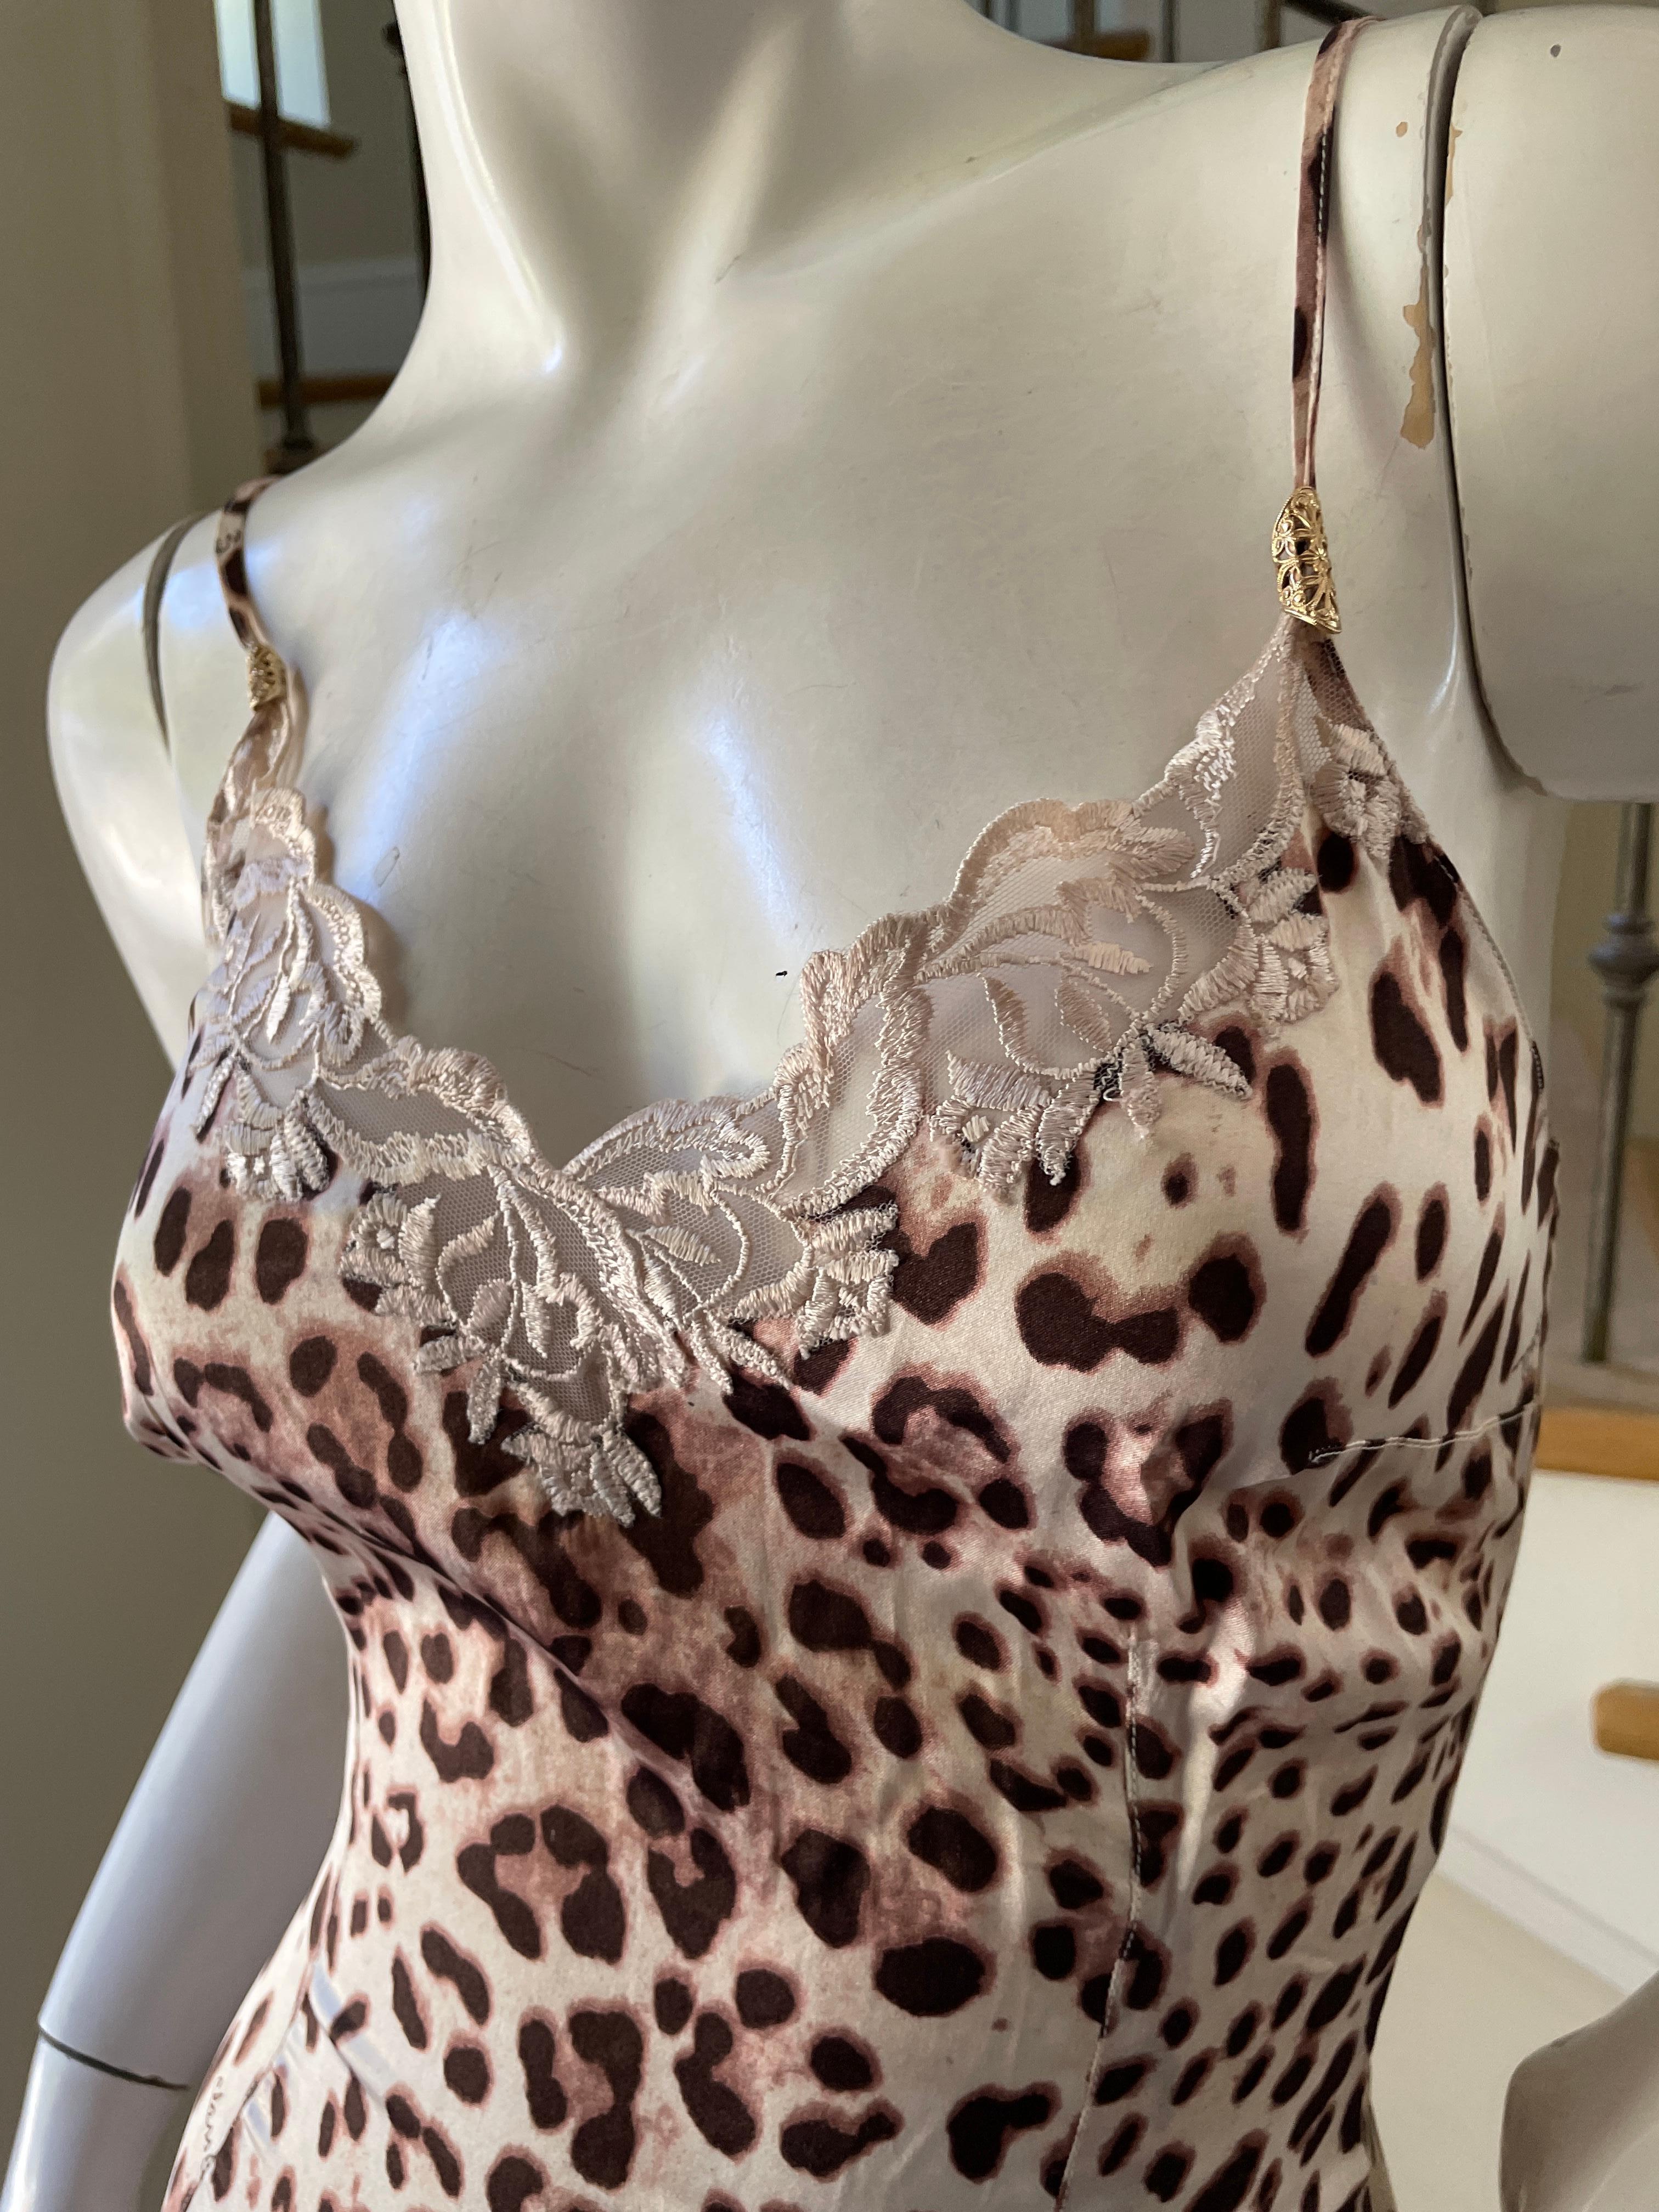 Class Cavalli Vintage Lace Trimmed Leopard Print Slip Dress  In Excellent Condition For Sale In Cloverdale, CA